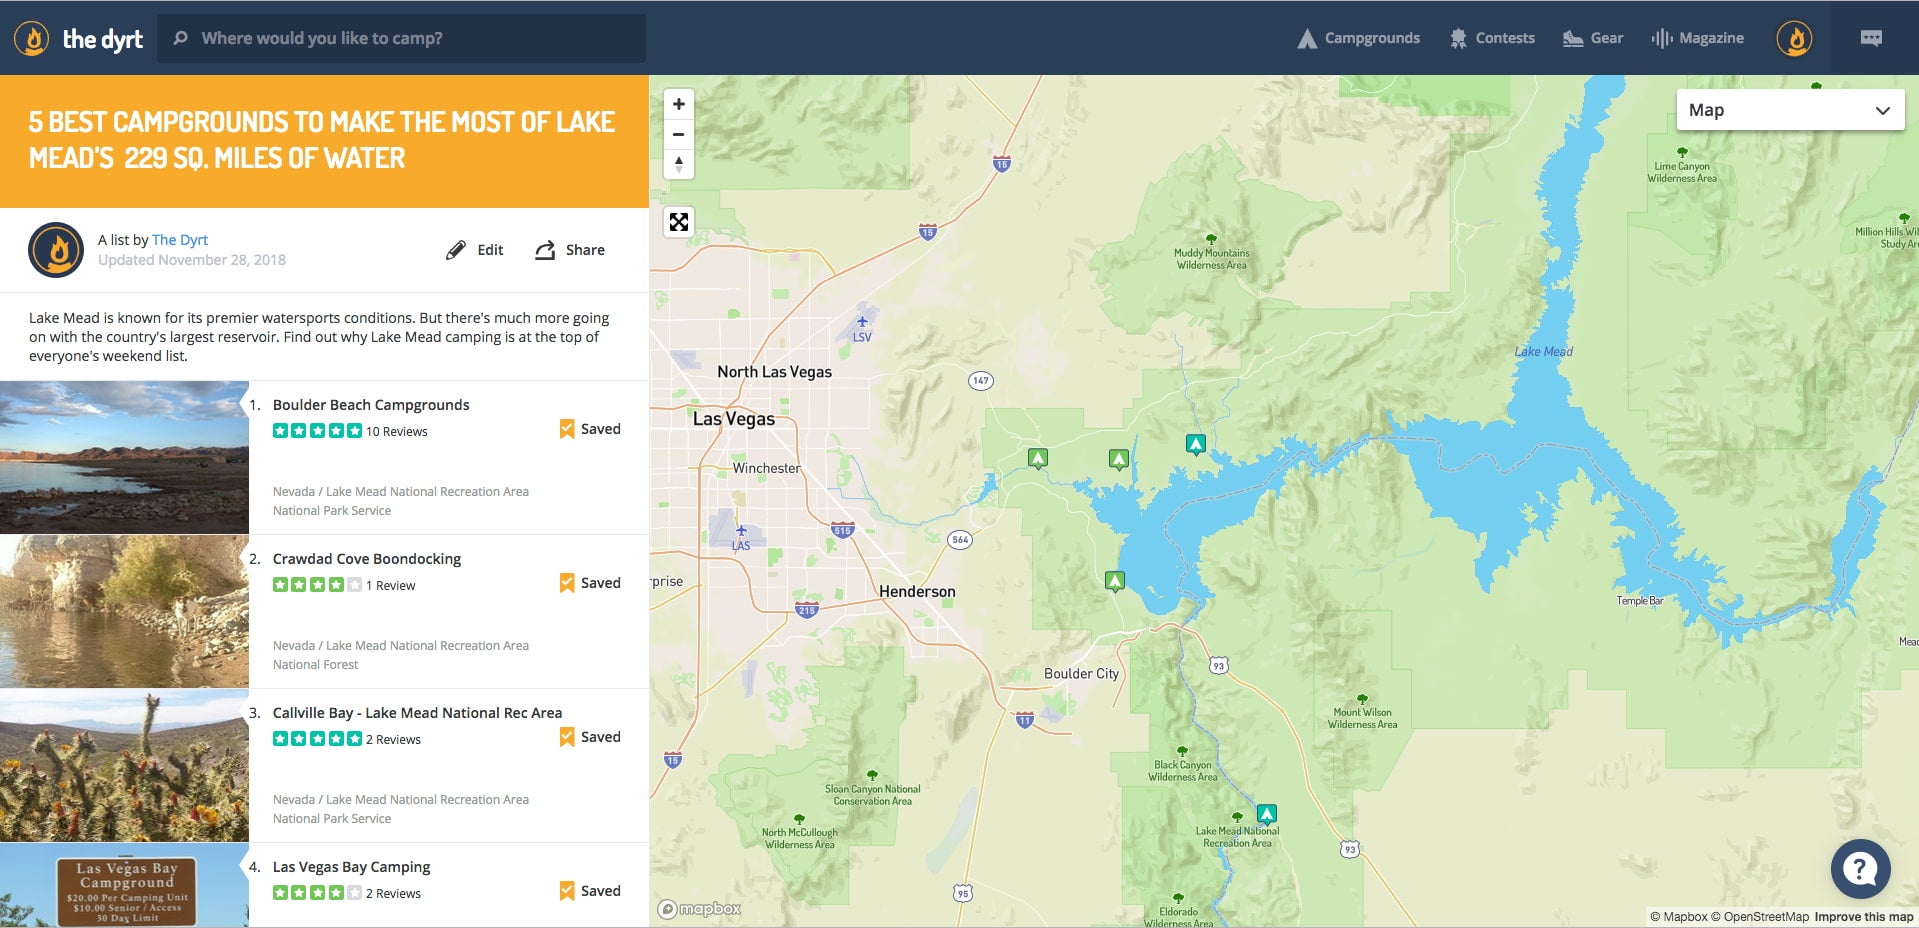 lake mead camping options mapped